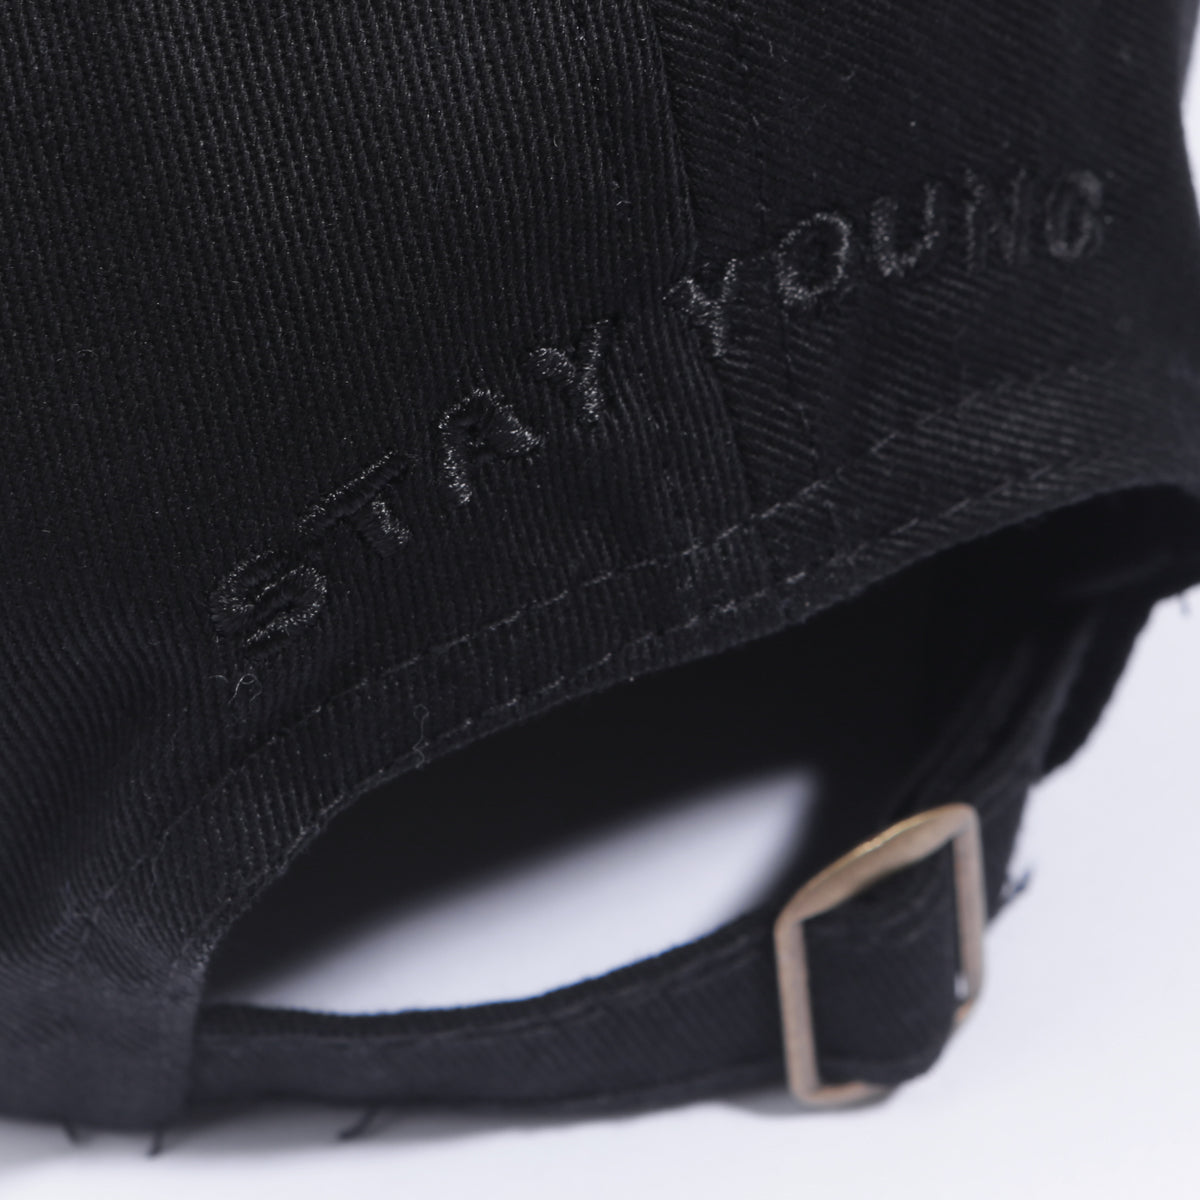 FOREVER YOUNG CREW Footwear | A local Indonesian footwear brand